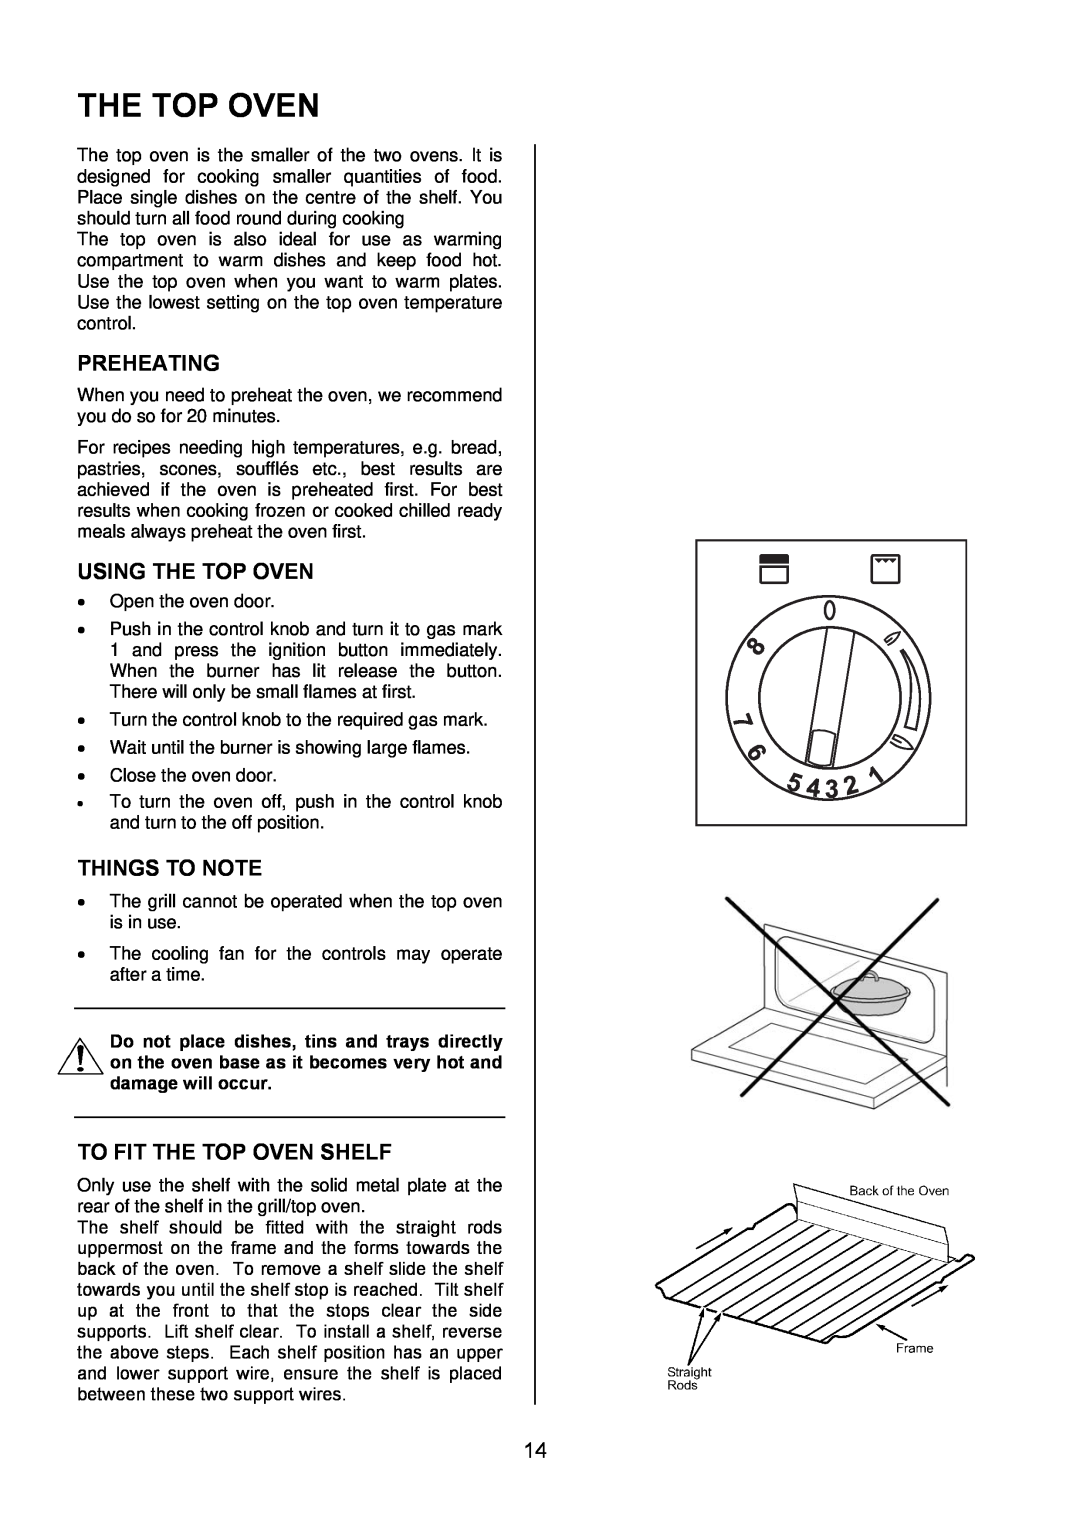 Electrolux EKG6046/EKG6047 manual Preheating, Using The Top Oven, To Fit The Top Oven Shelf, Things To Note 